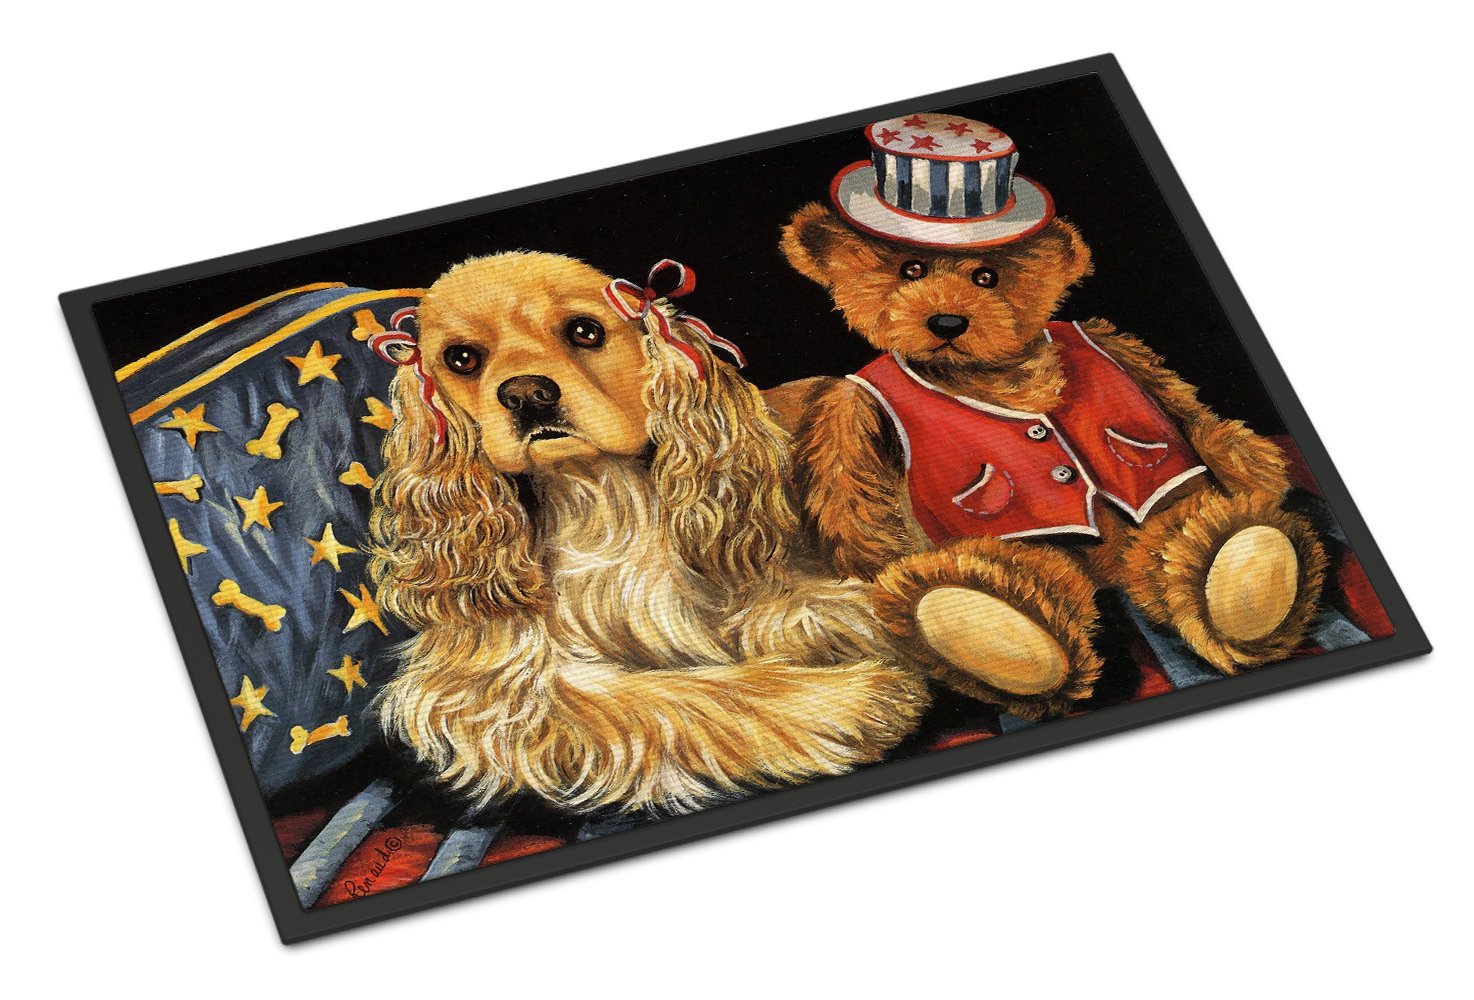 Cocker Spaniel Annie and Henri Indoor or Outdoor Mat 24x36 PPP3256JMAT by Caroline's Treasures